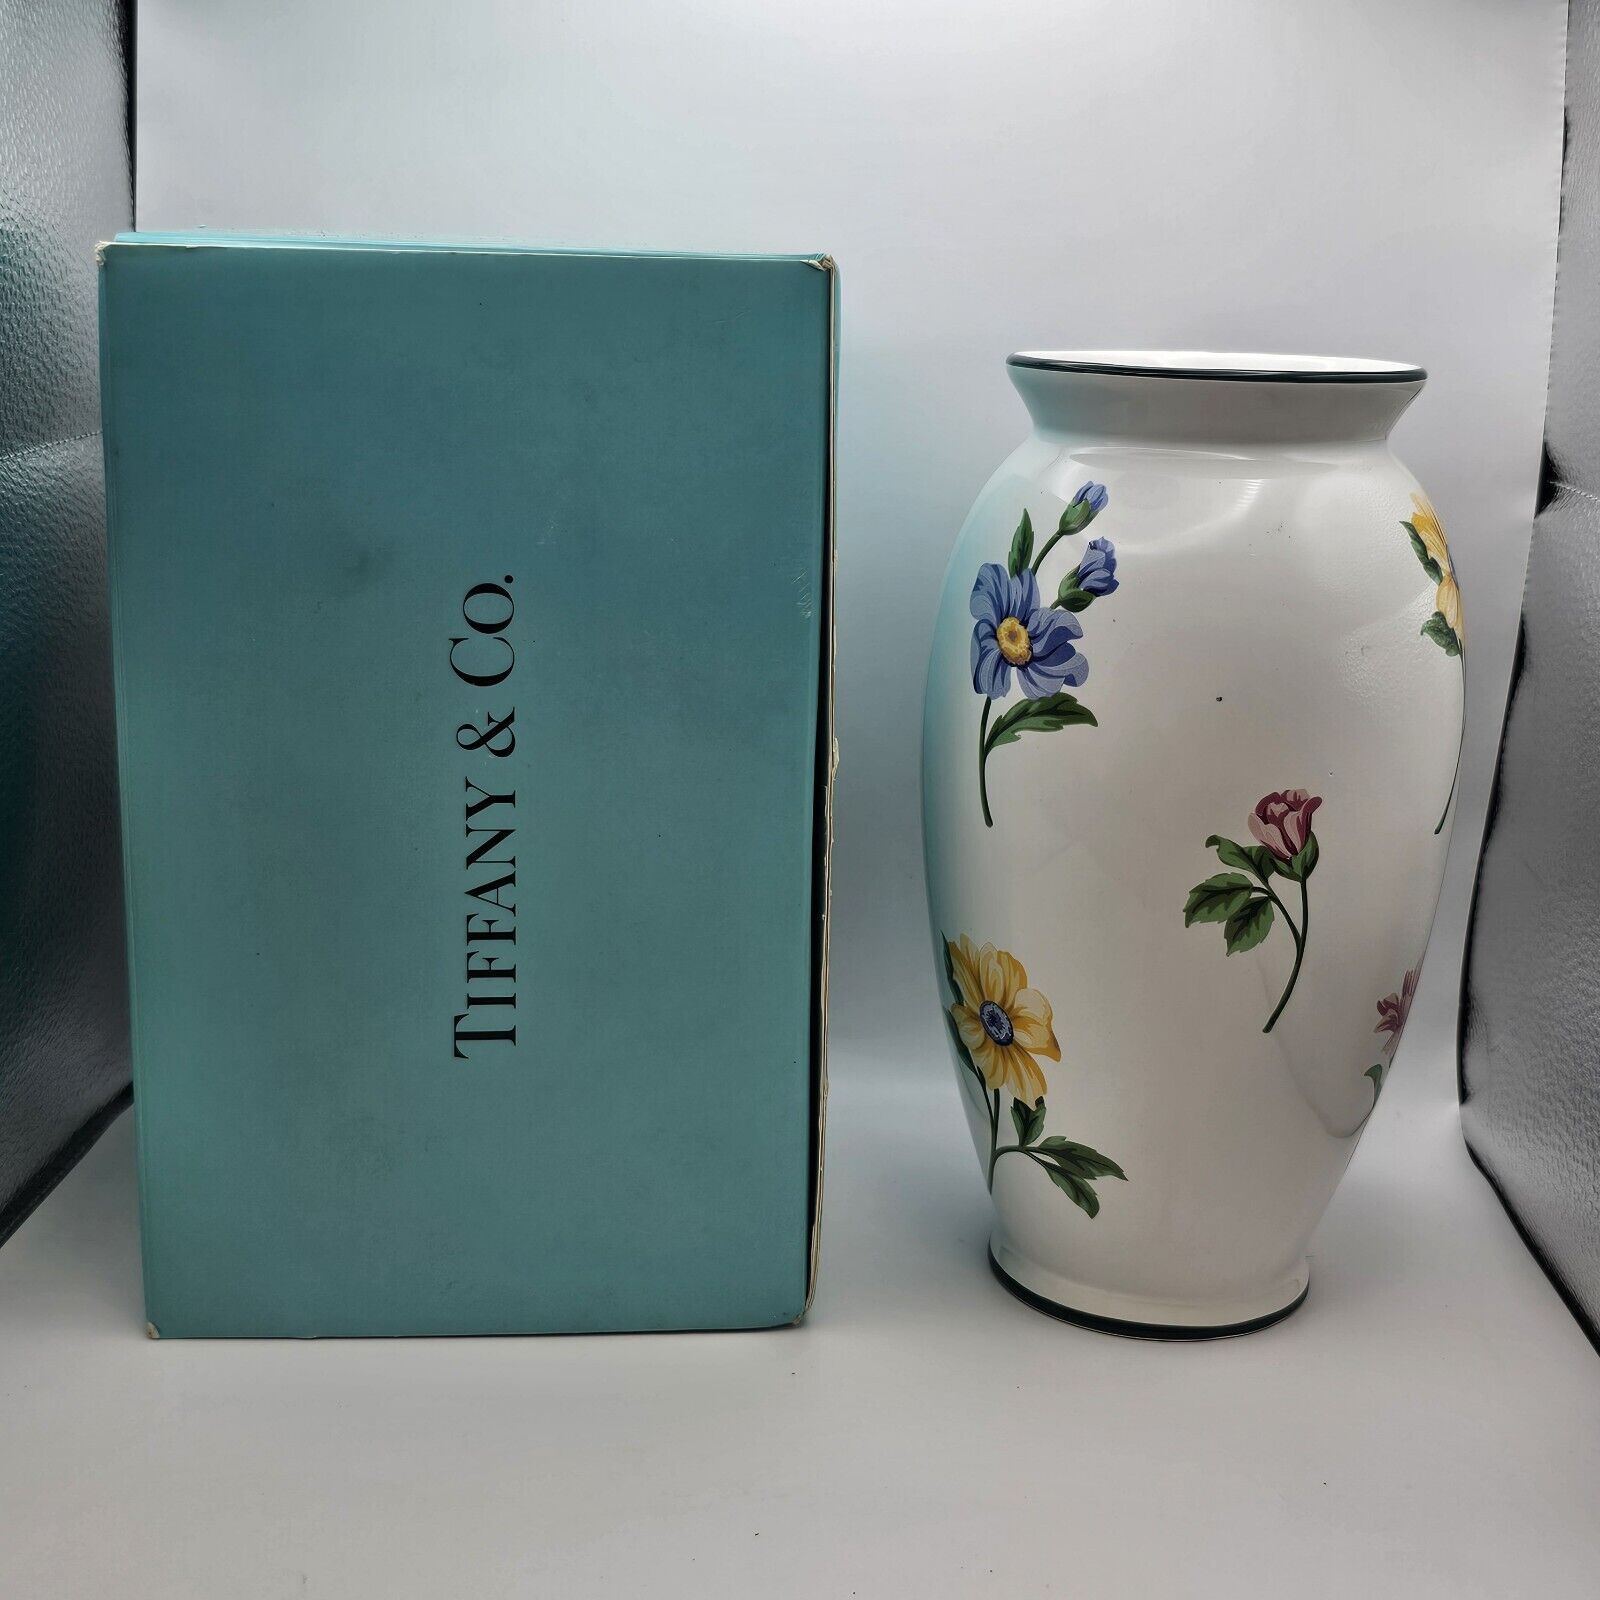 NEW Vintage Tiffany & Co Porcelain Vase Multicolored Hand Painted Floral NIB NM